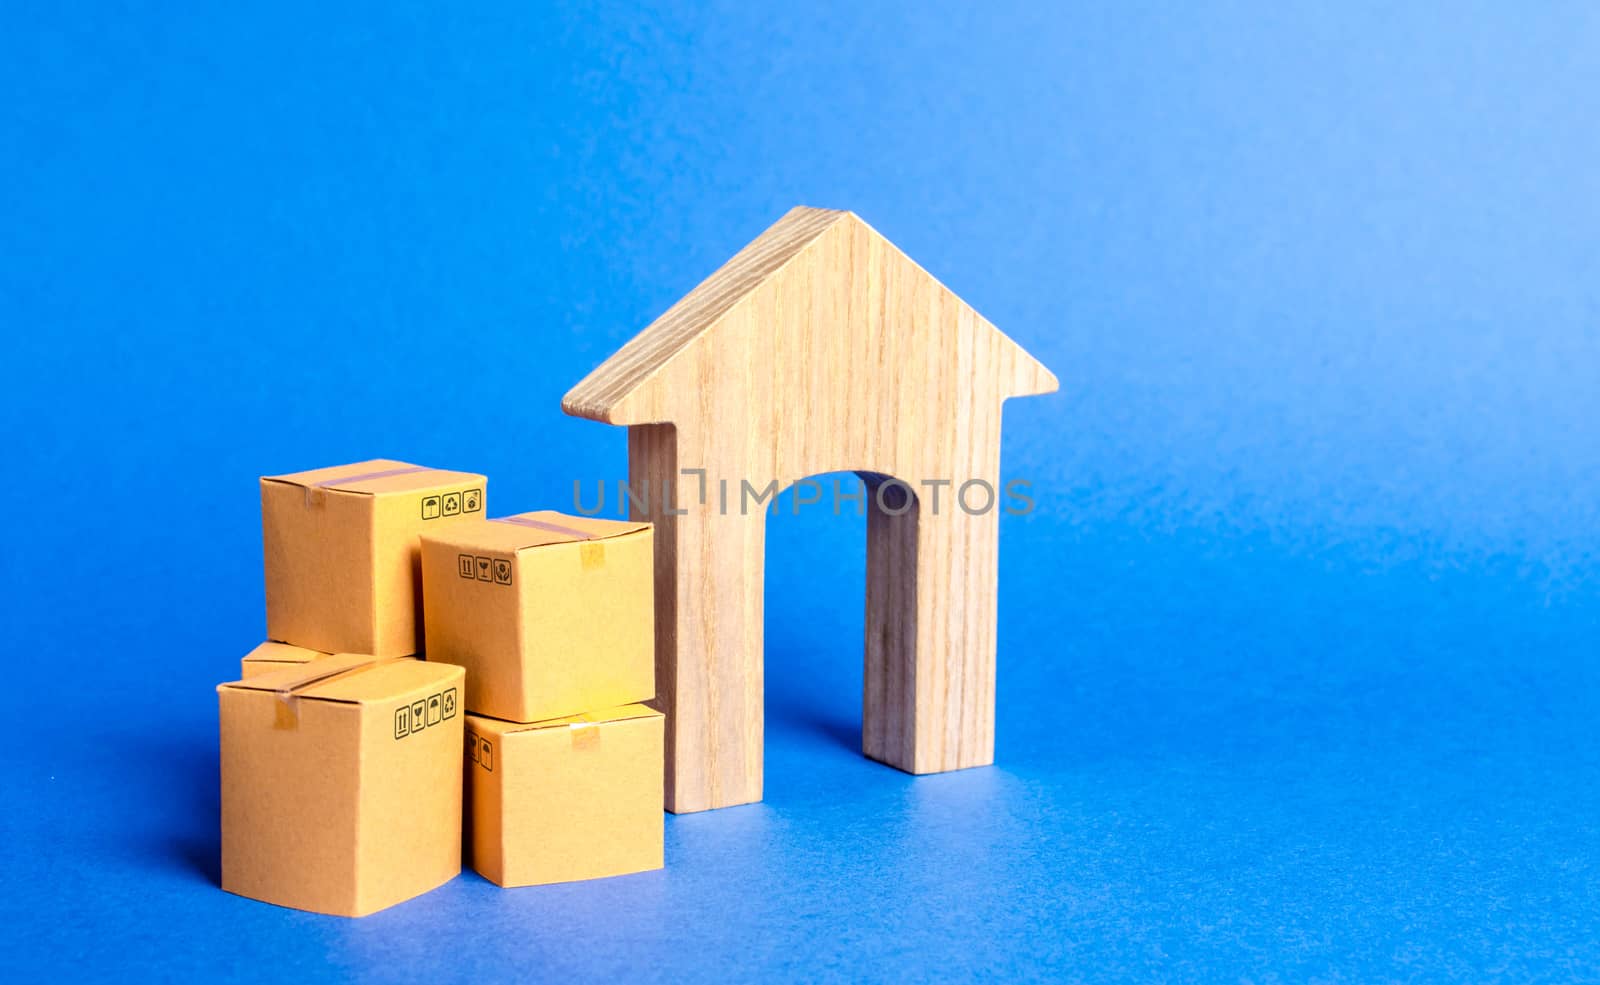 Residential house and pile of boxes. Concept of moving to another house or city. beginning of a new stage of life. Property transportation. Freight shipping, goods delivery and installation